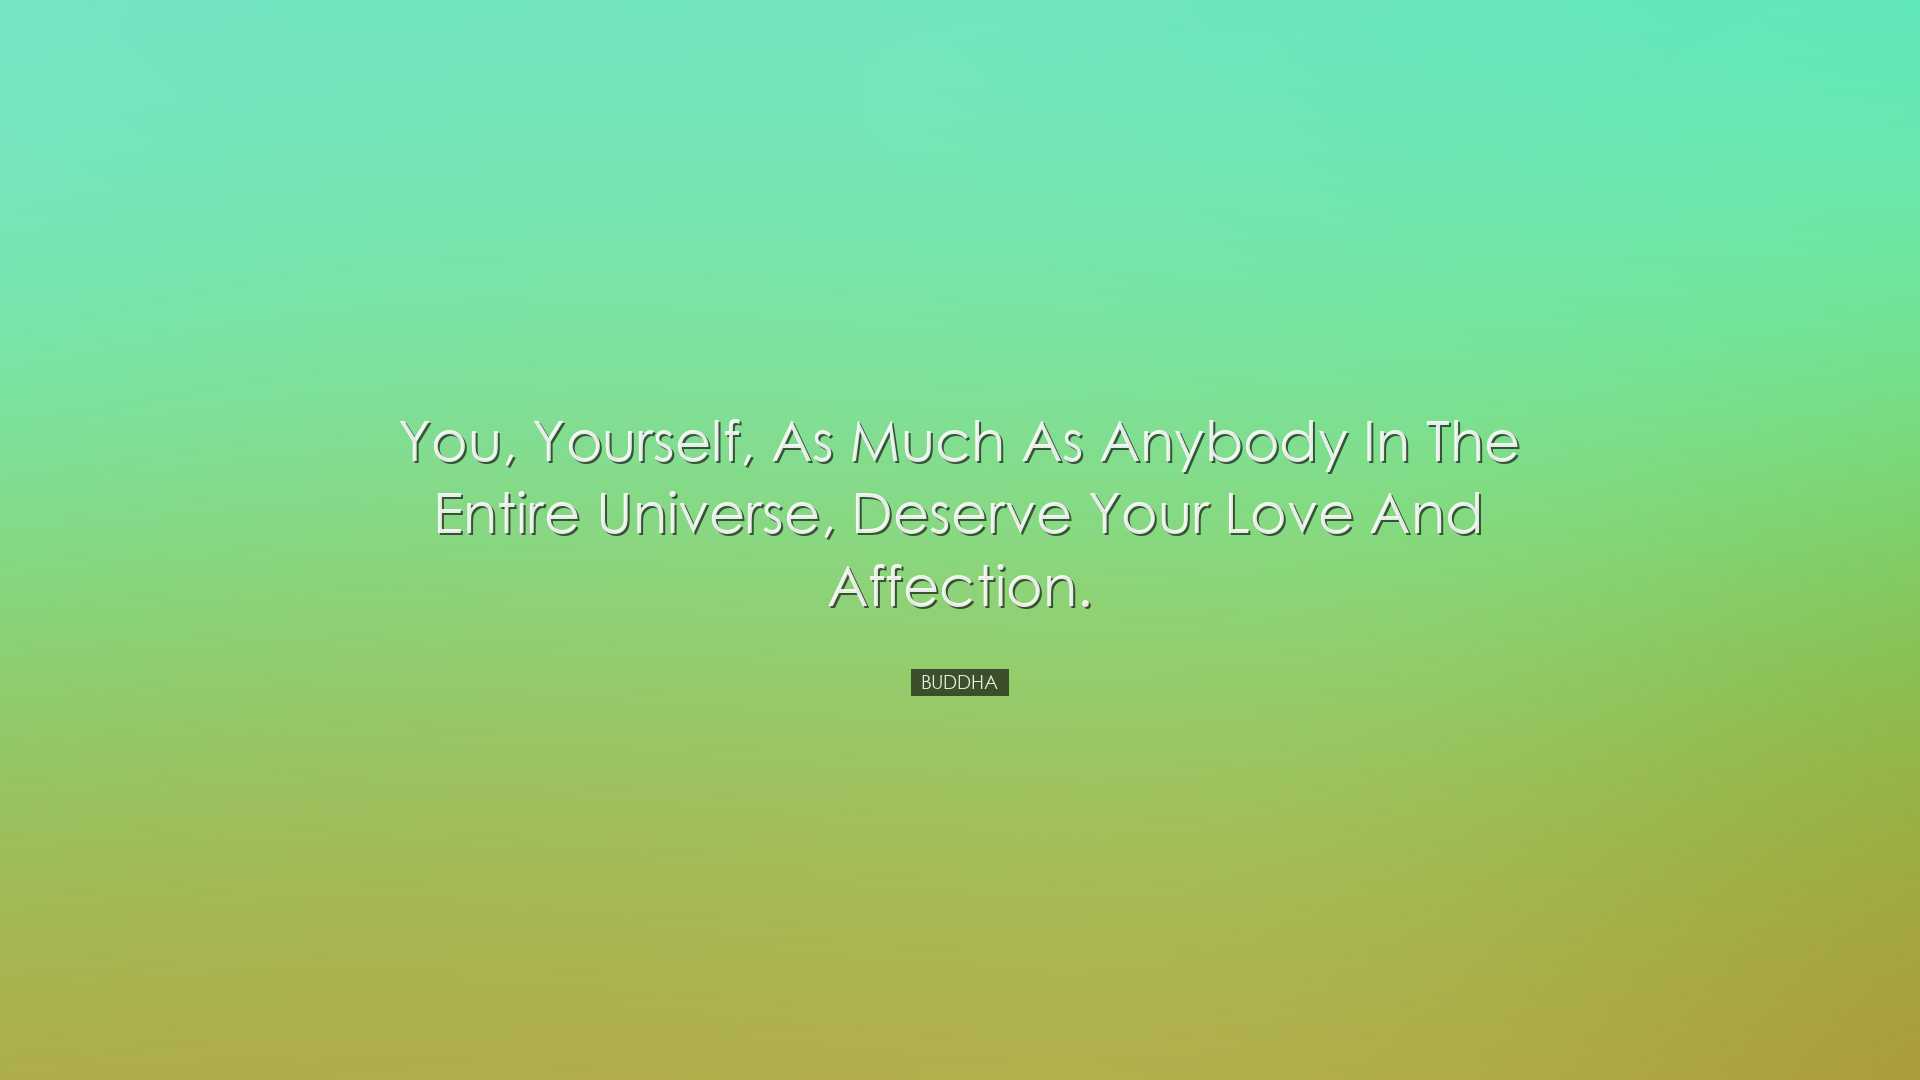 You, yourself, as much as anybody in the entire universe, deserve